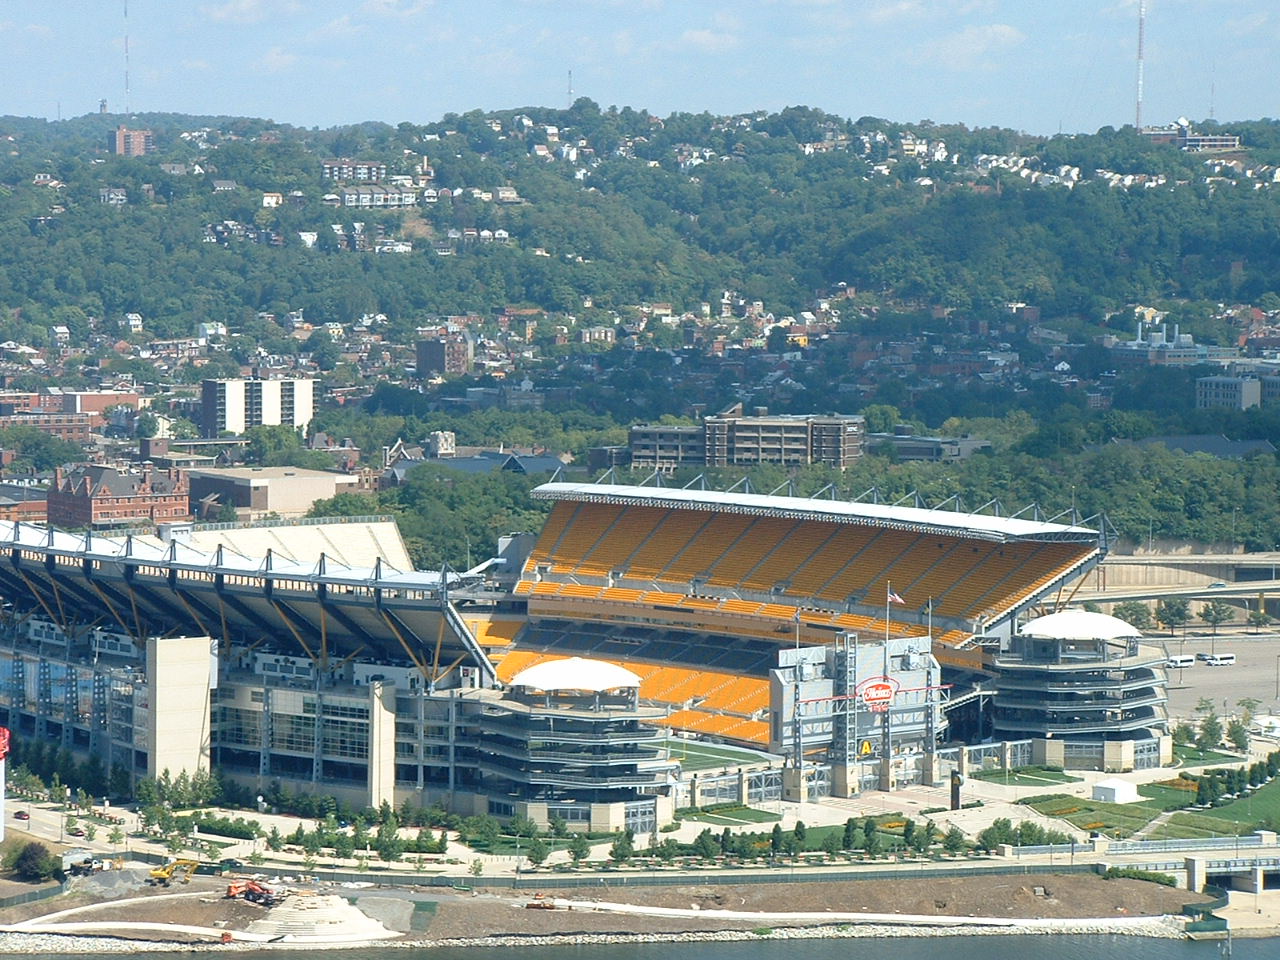 Great shot of Heinz Field, home of the Pittsburgh Steelers!